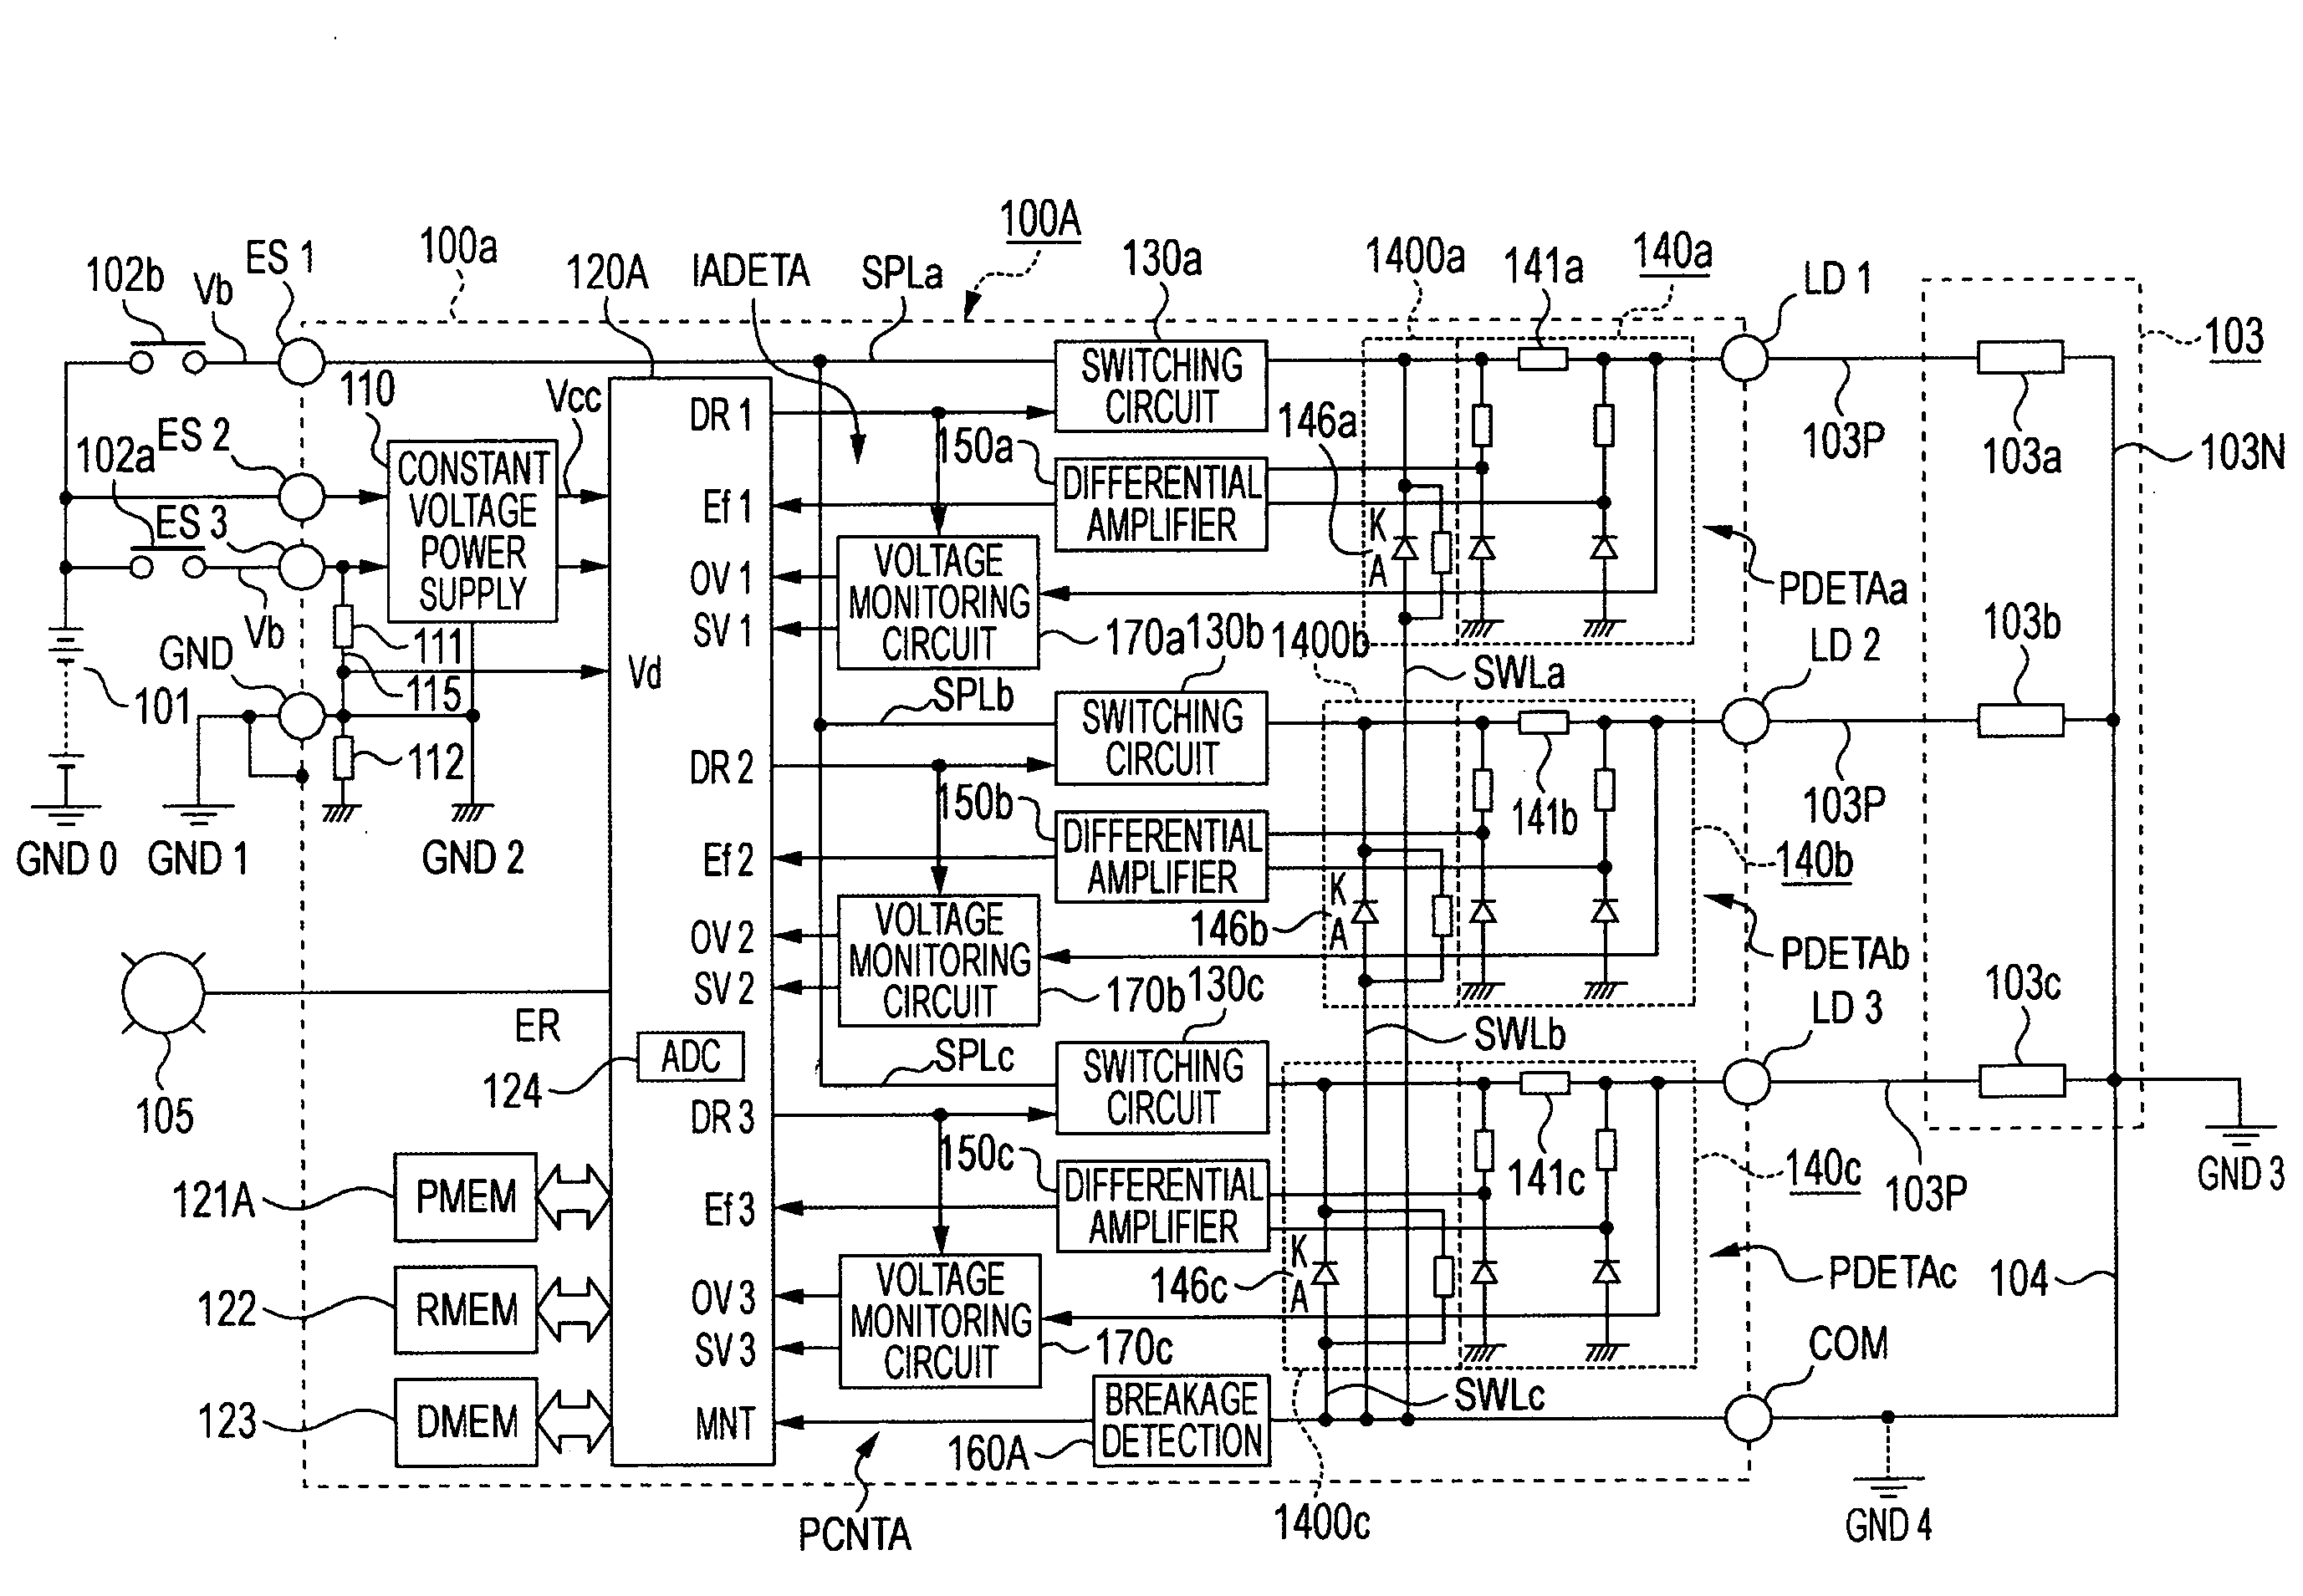 Power supply control device for on-vehicle electrical loads